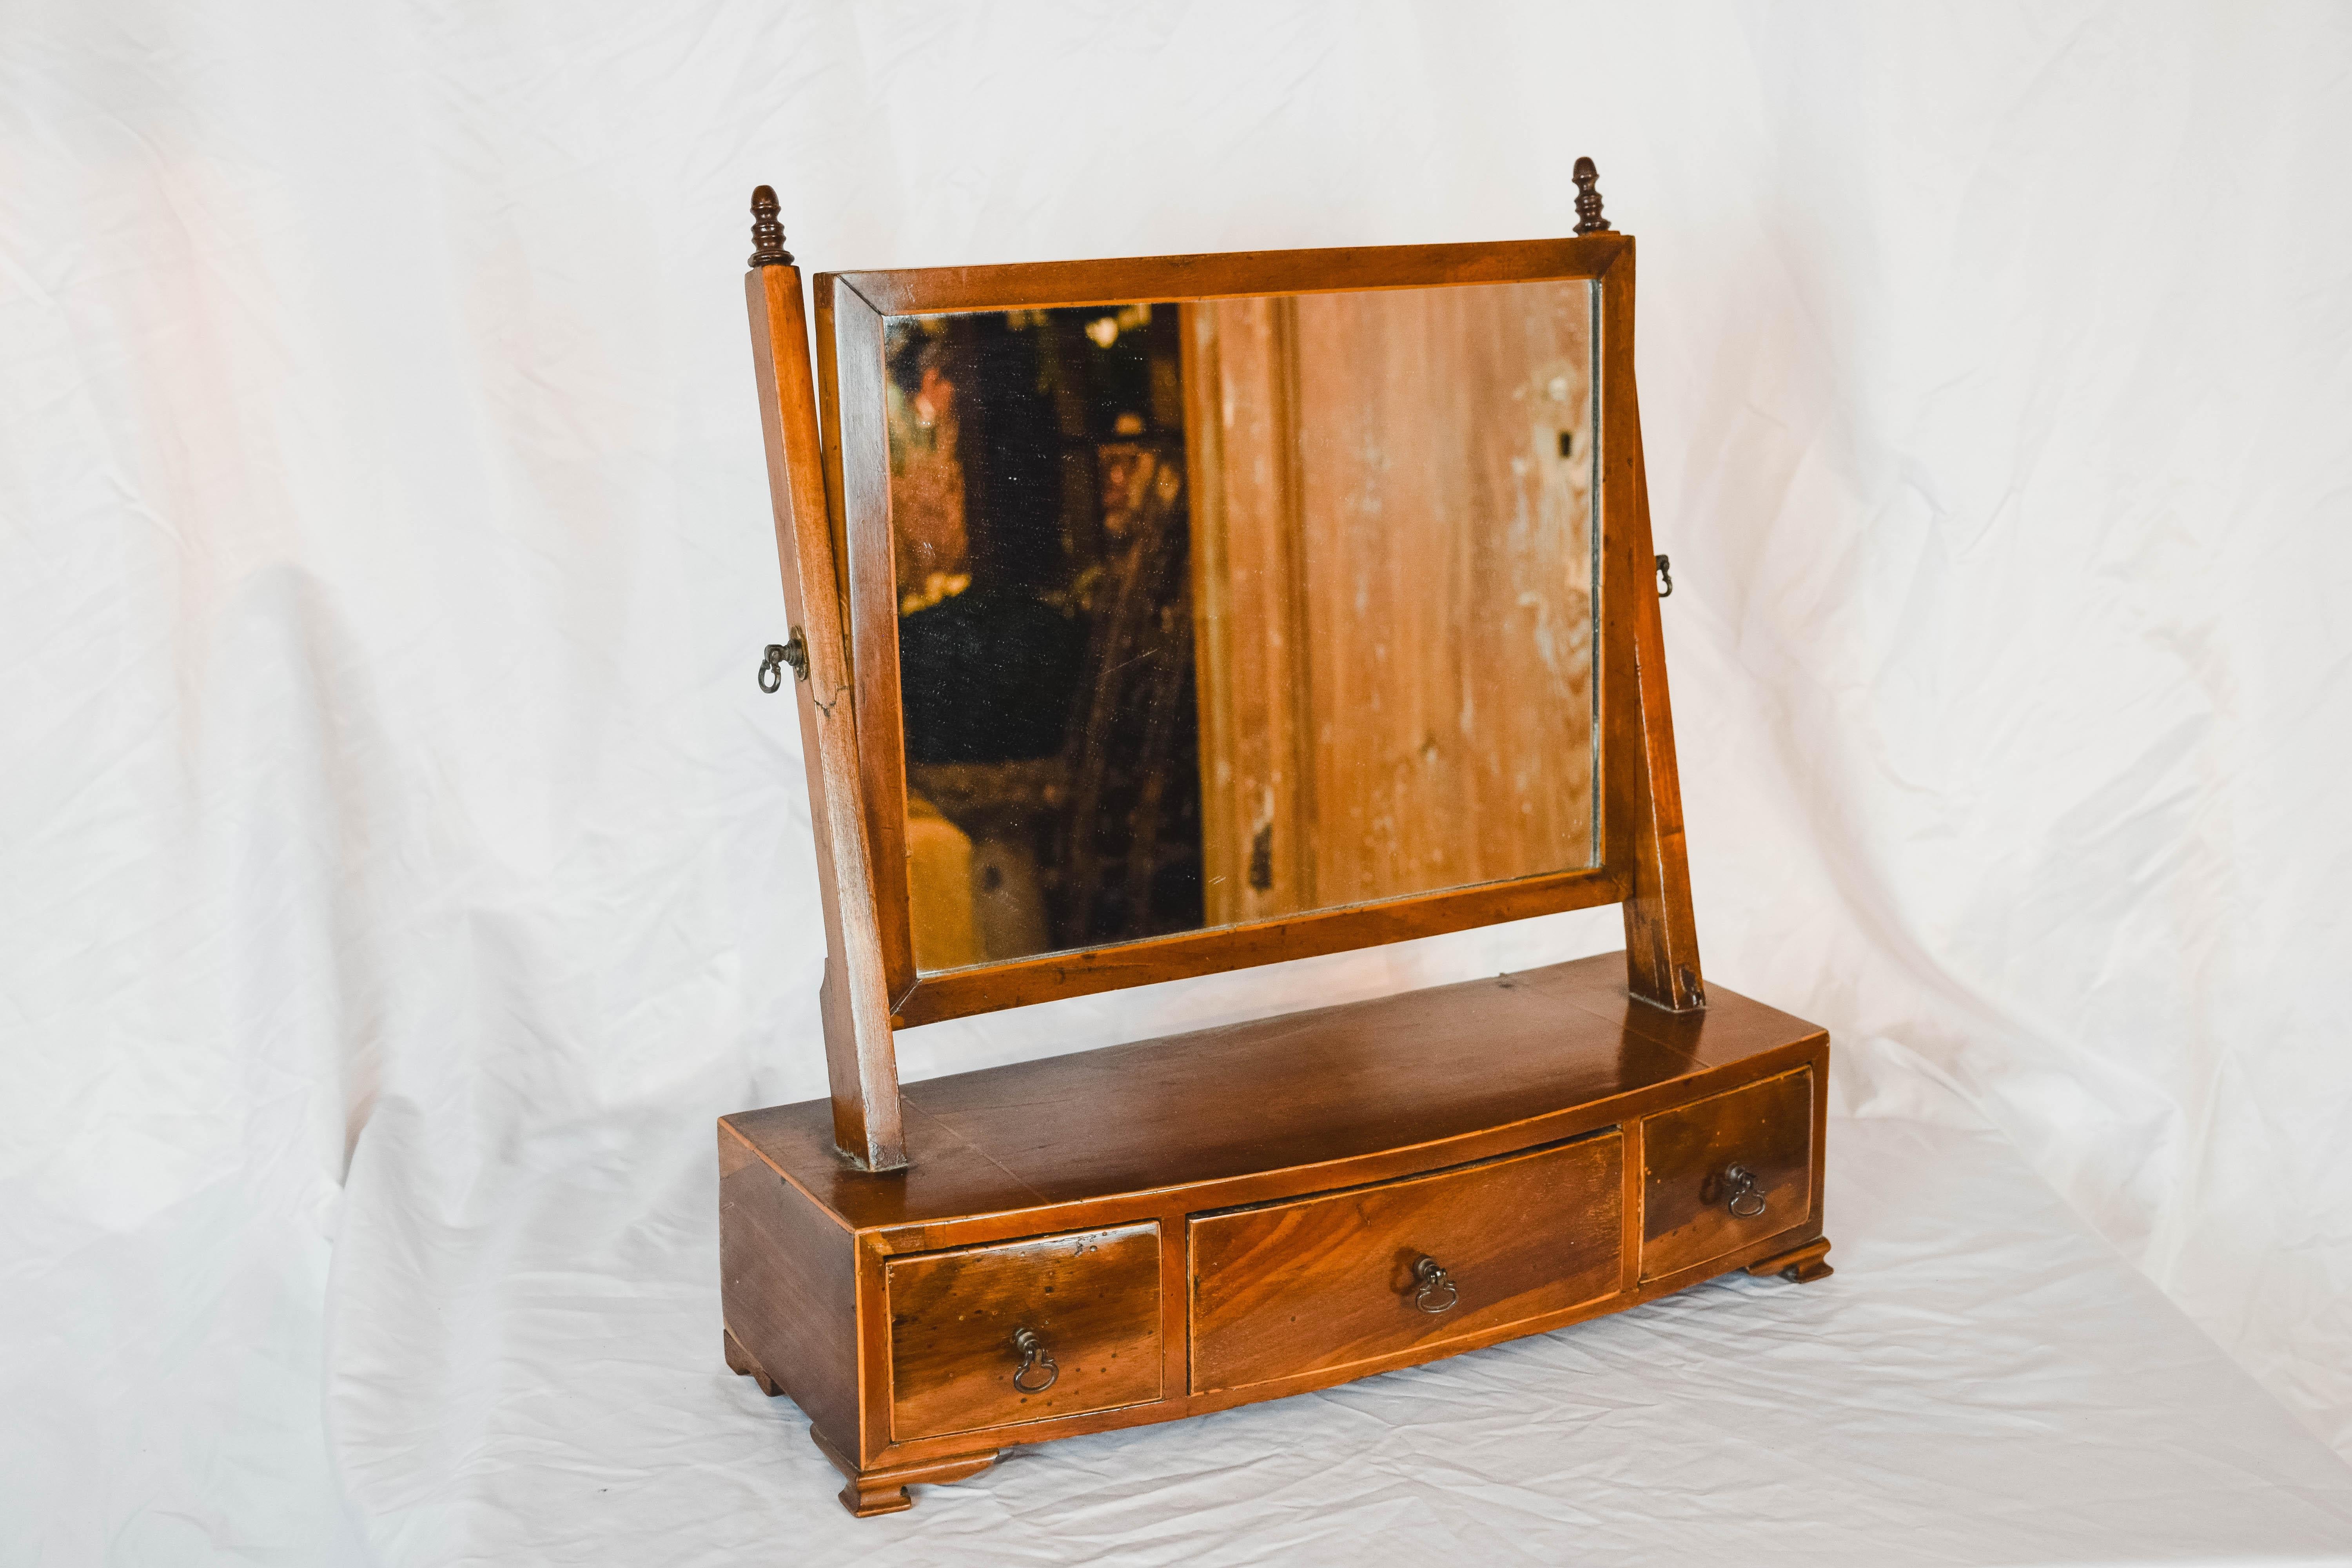 This antique English dressing table mirror is in good condition. Displaying good color throughout. The wood is believed to be Mahogany. The mirror is original and adjustable. The base is on bracket feet. A suite of three, oak lined, shaped drawers